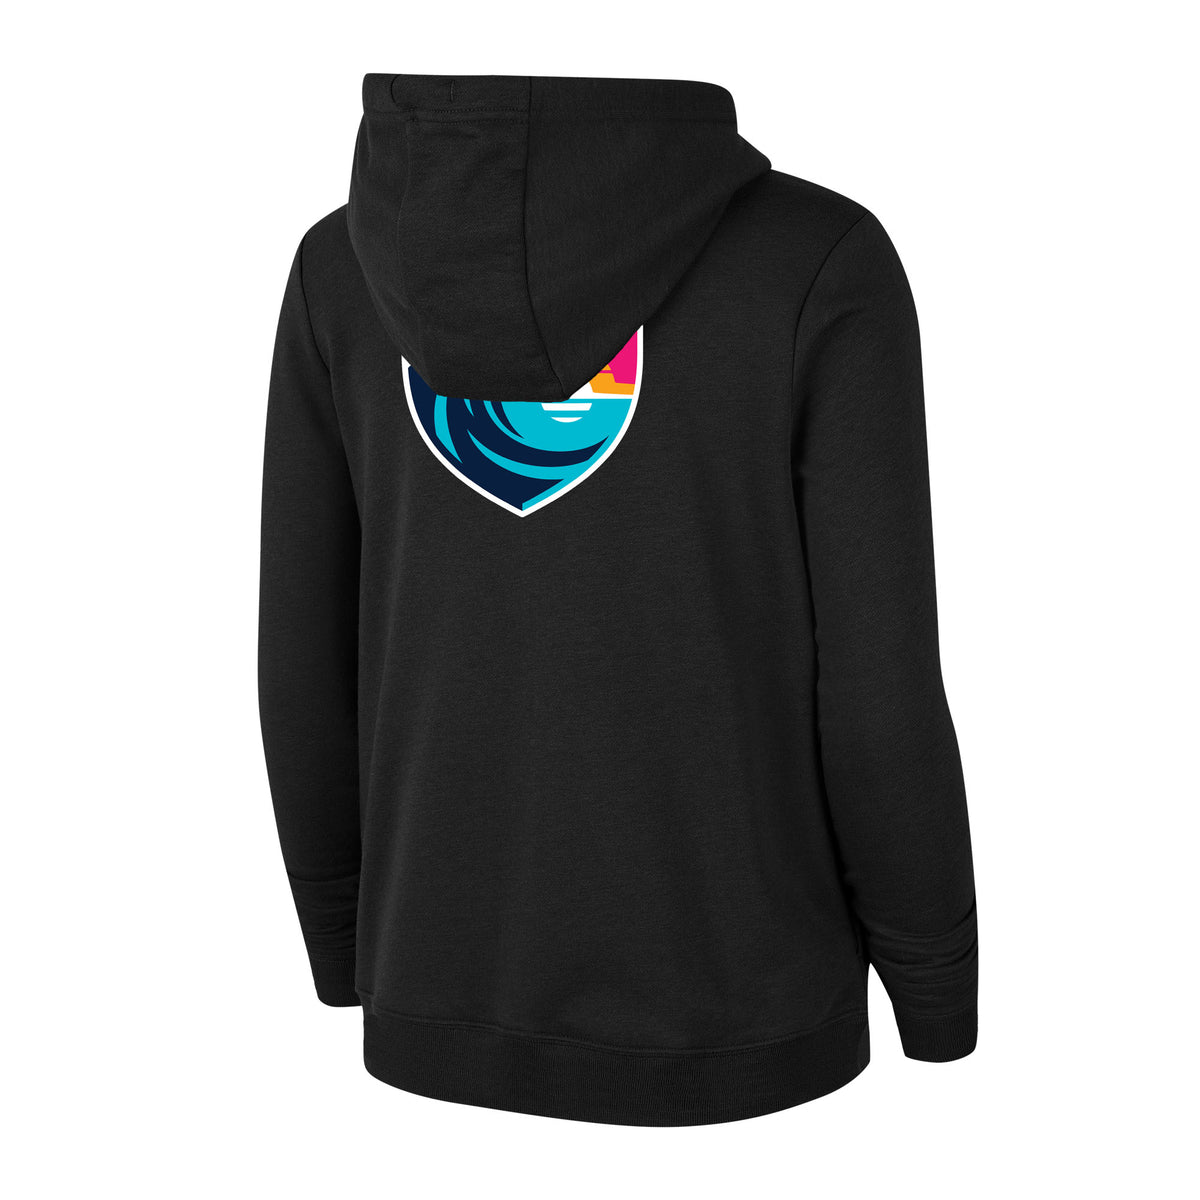 Women's Nike Sweaters - up to −50%